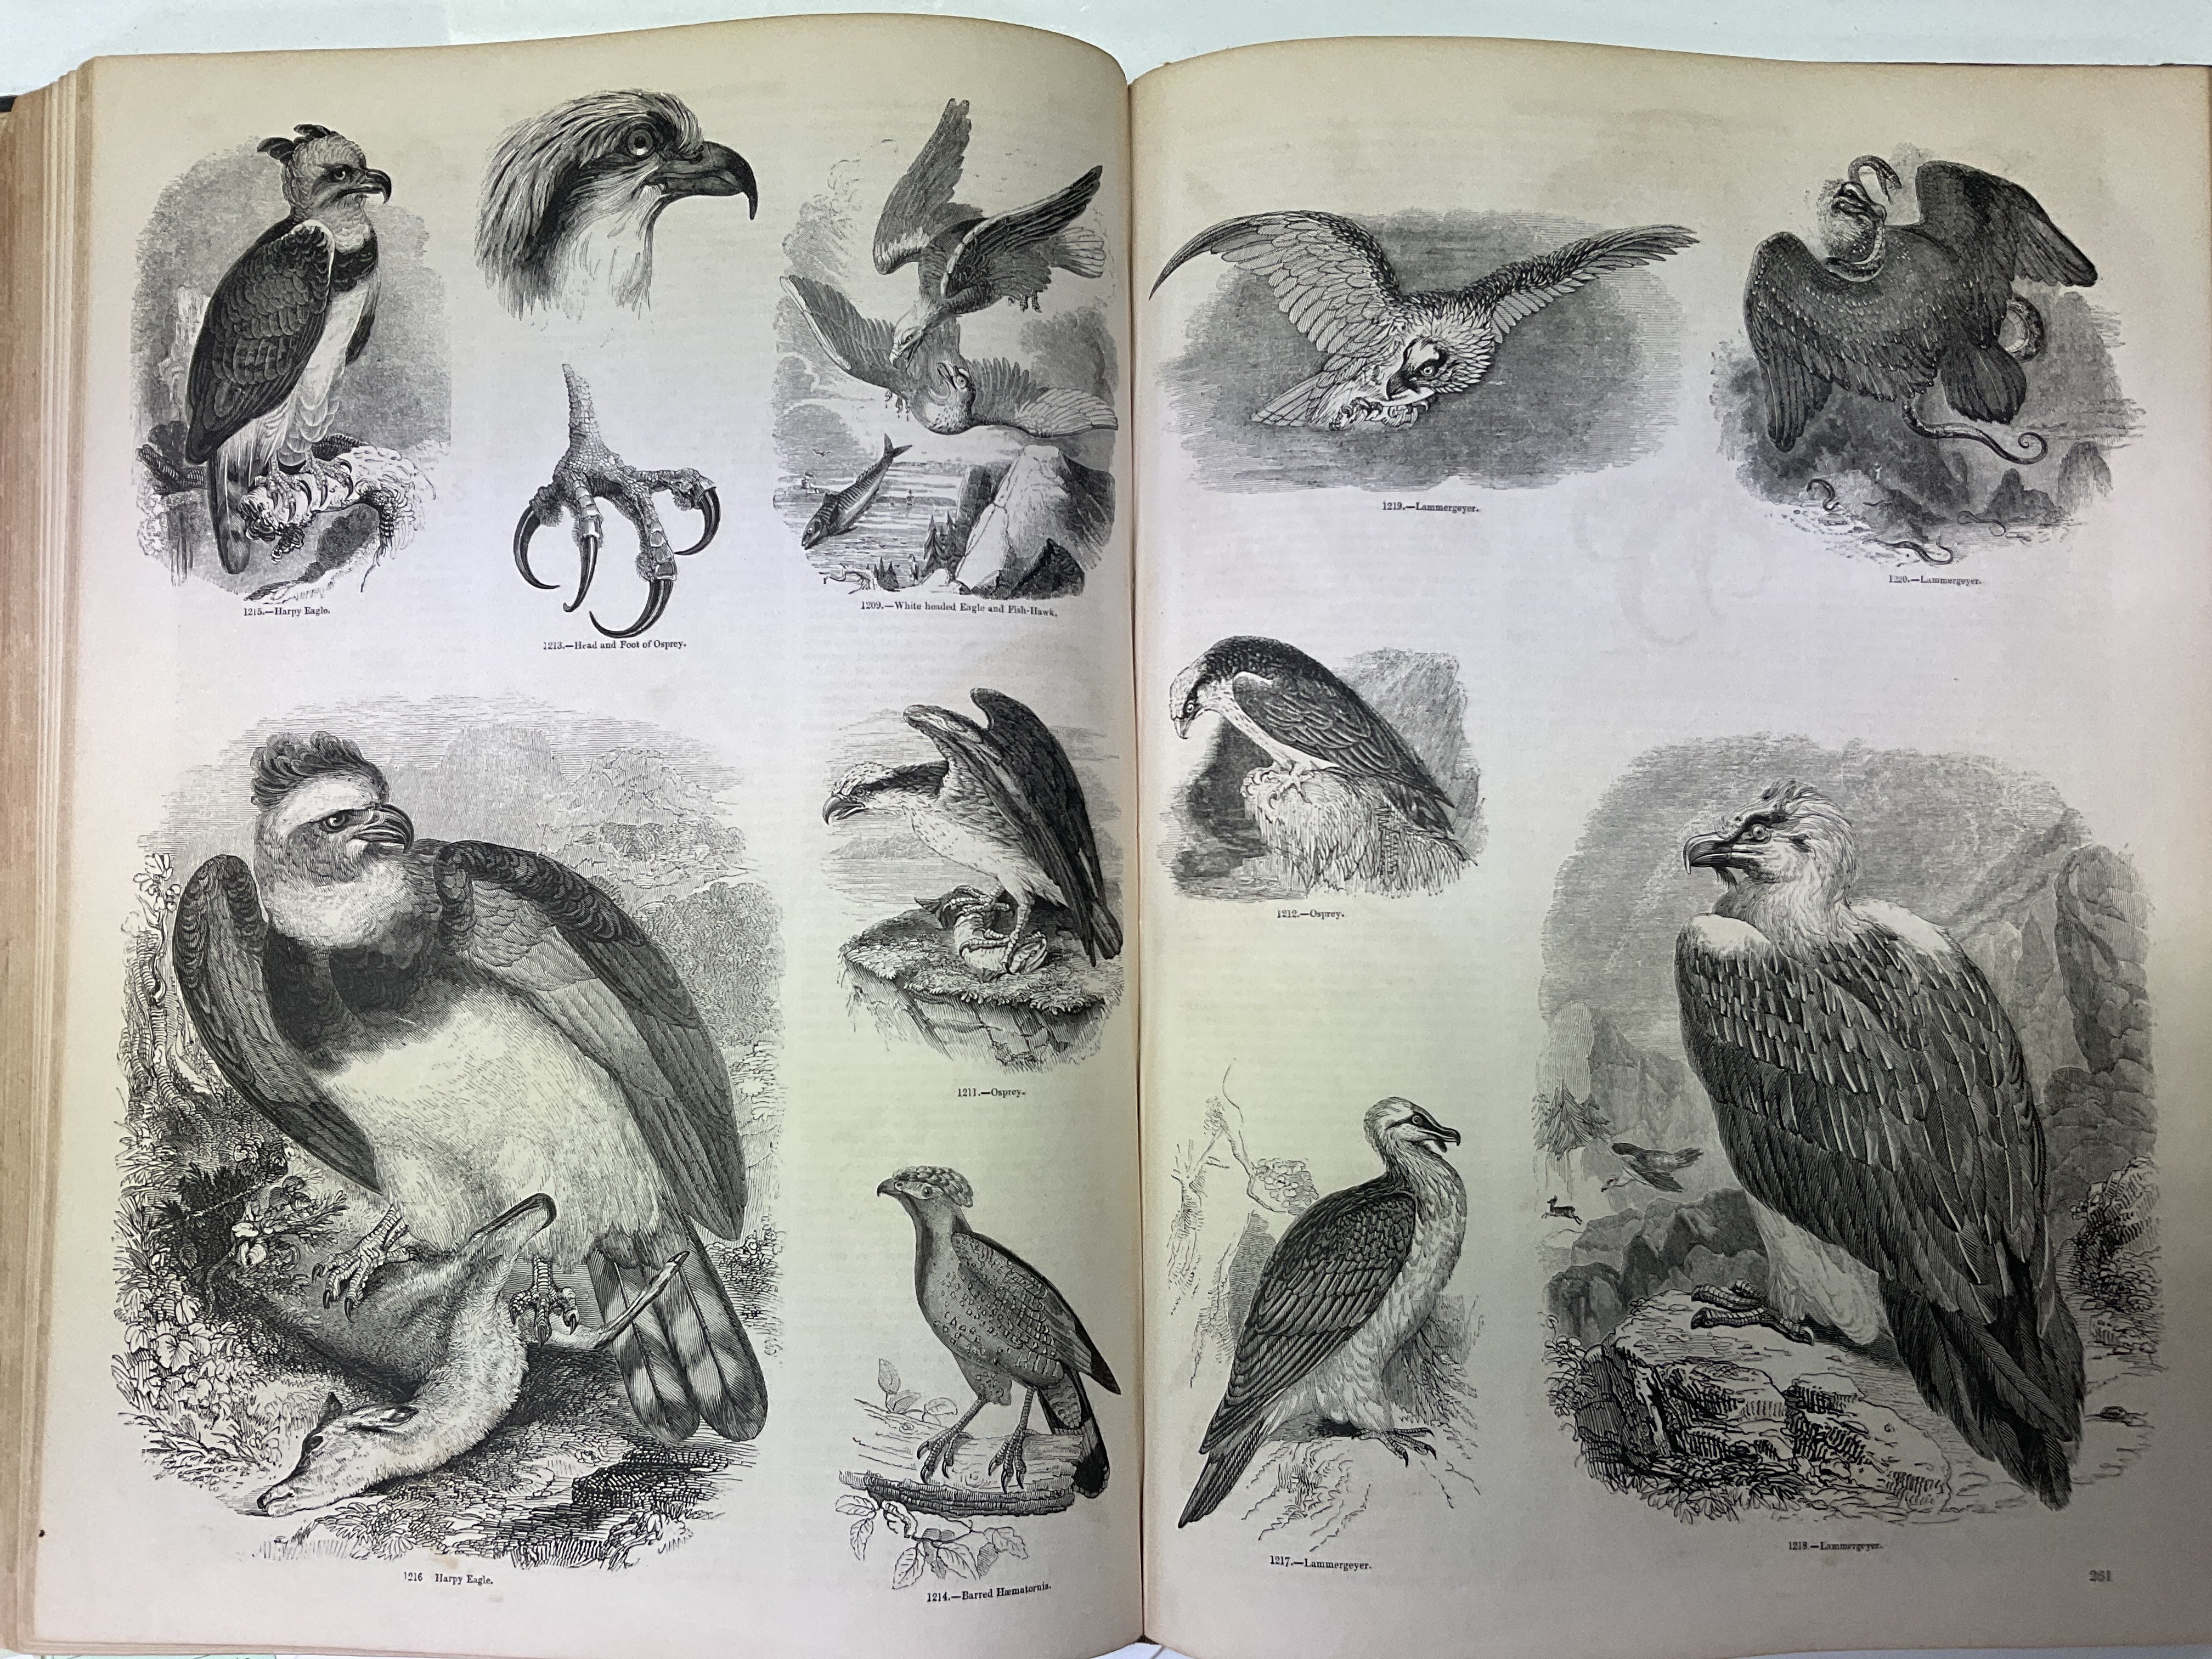 A bound edition of The Pictorial Museum of Animated Nature, Vol 1 Mammalia. Birds by Charles - Image 5 of 5